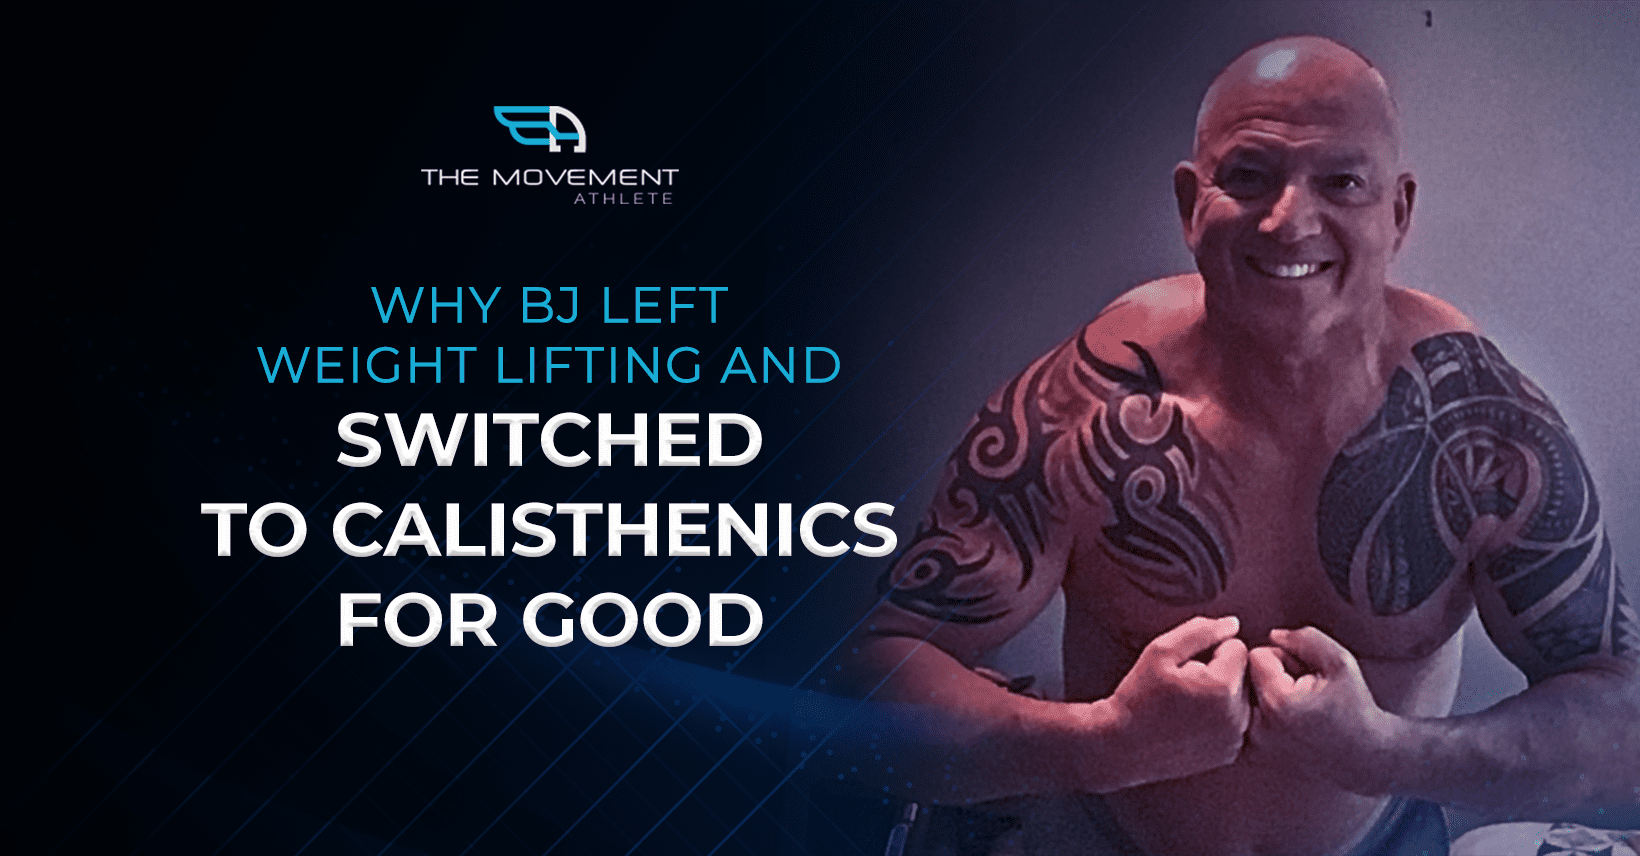 Why BJ left weight training and switched to calisthenics for good